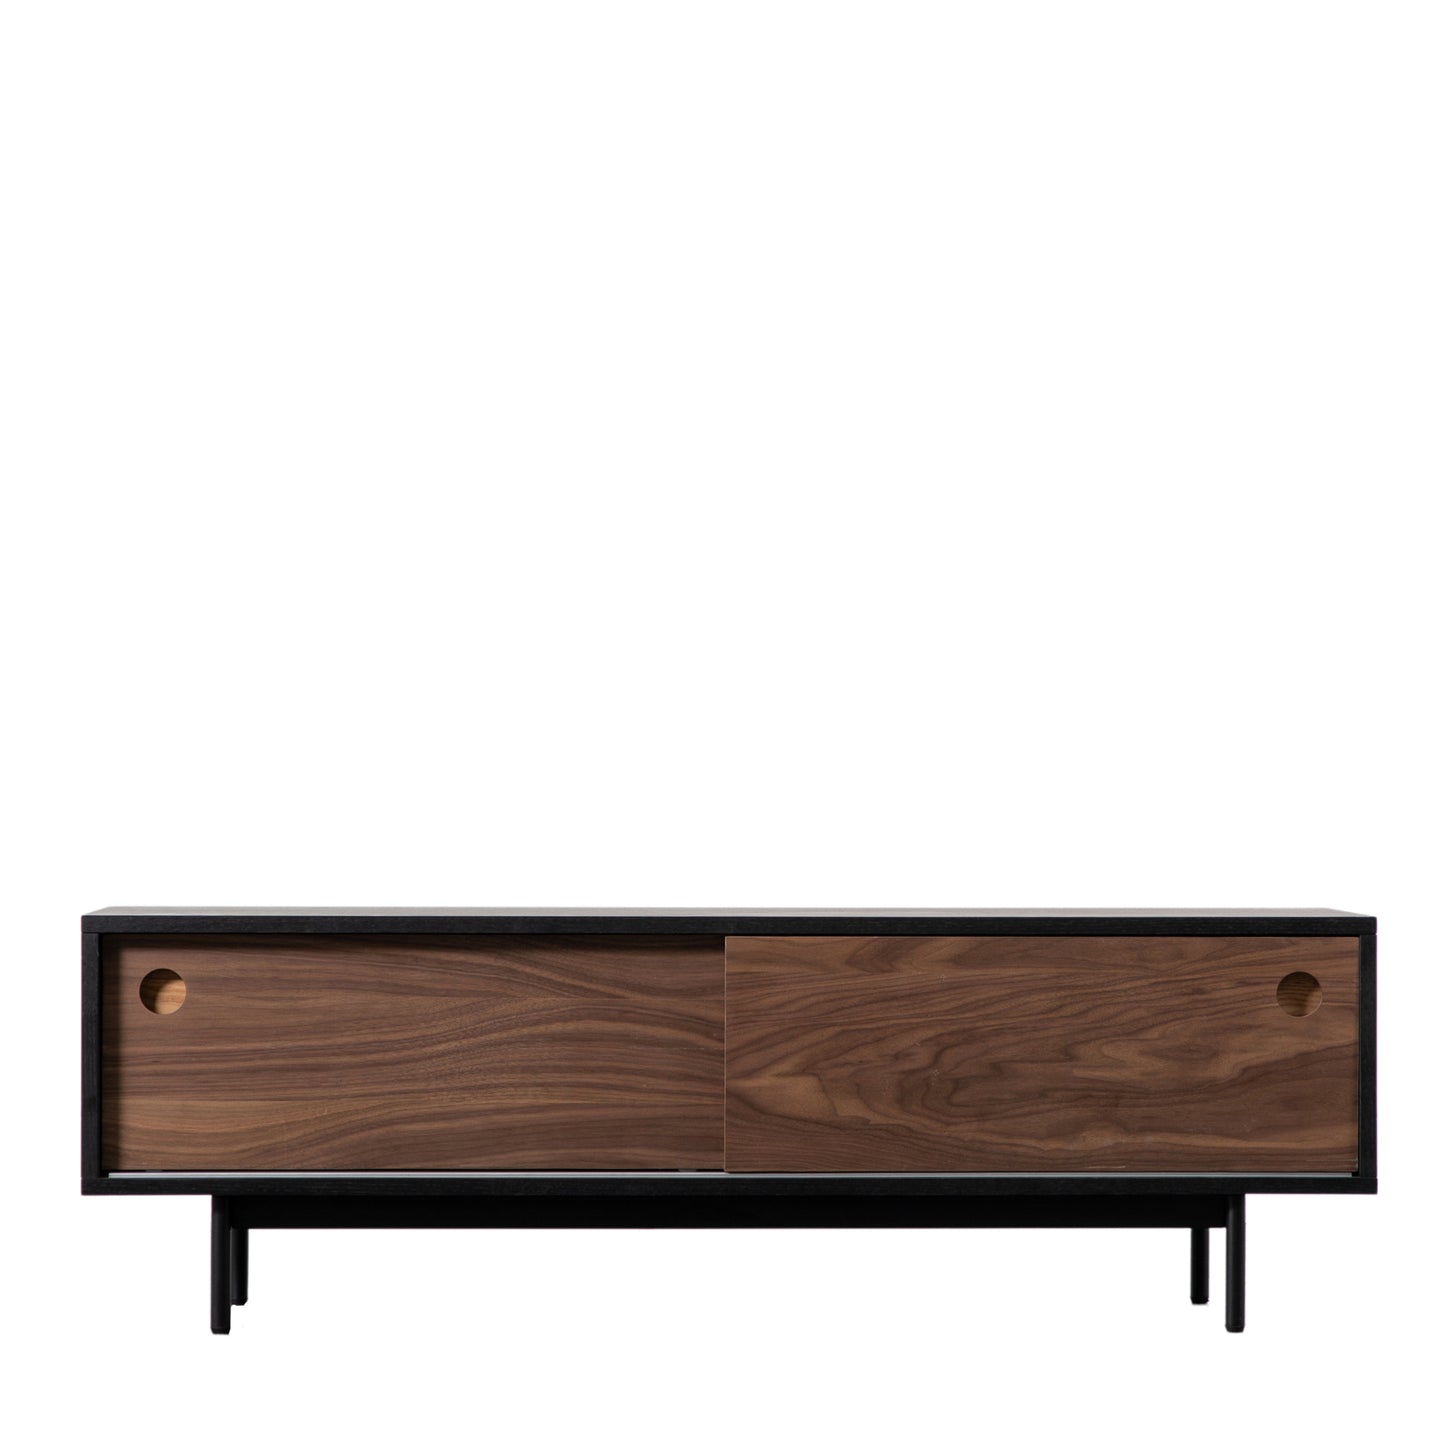 A Barbican Media Unit 1400x400x450mm TV stand with two drawers and black legs for interior decor at Kikiathome.co.uk.